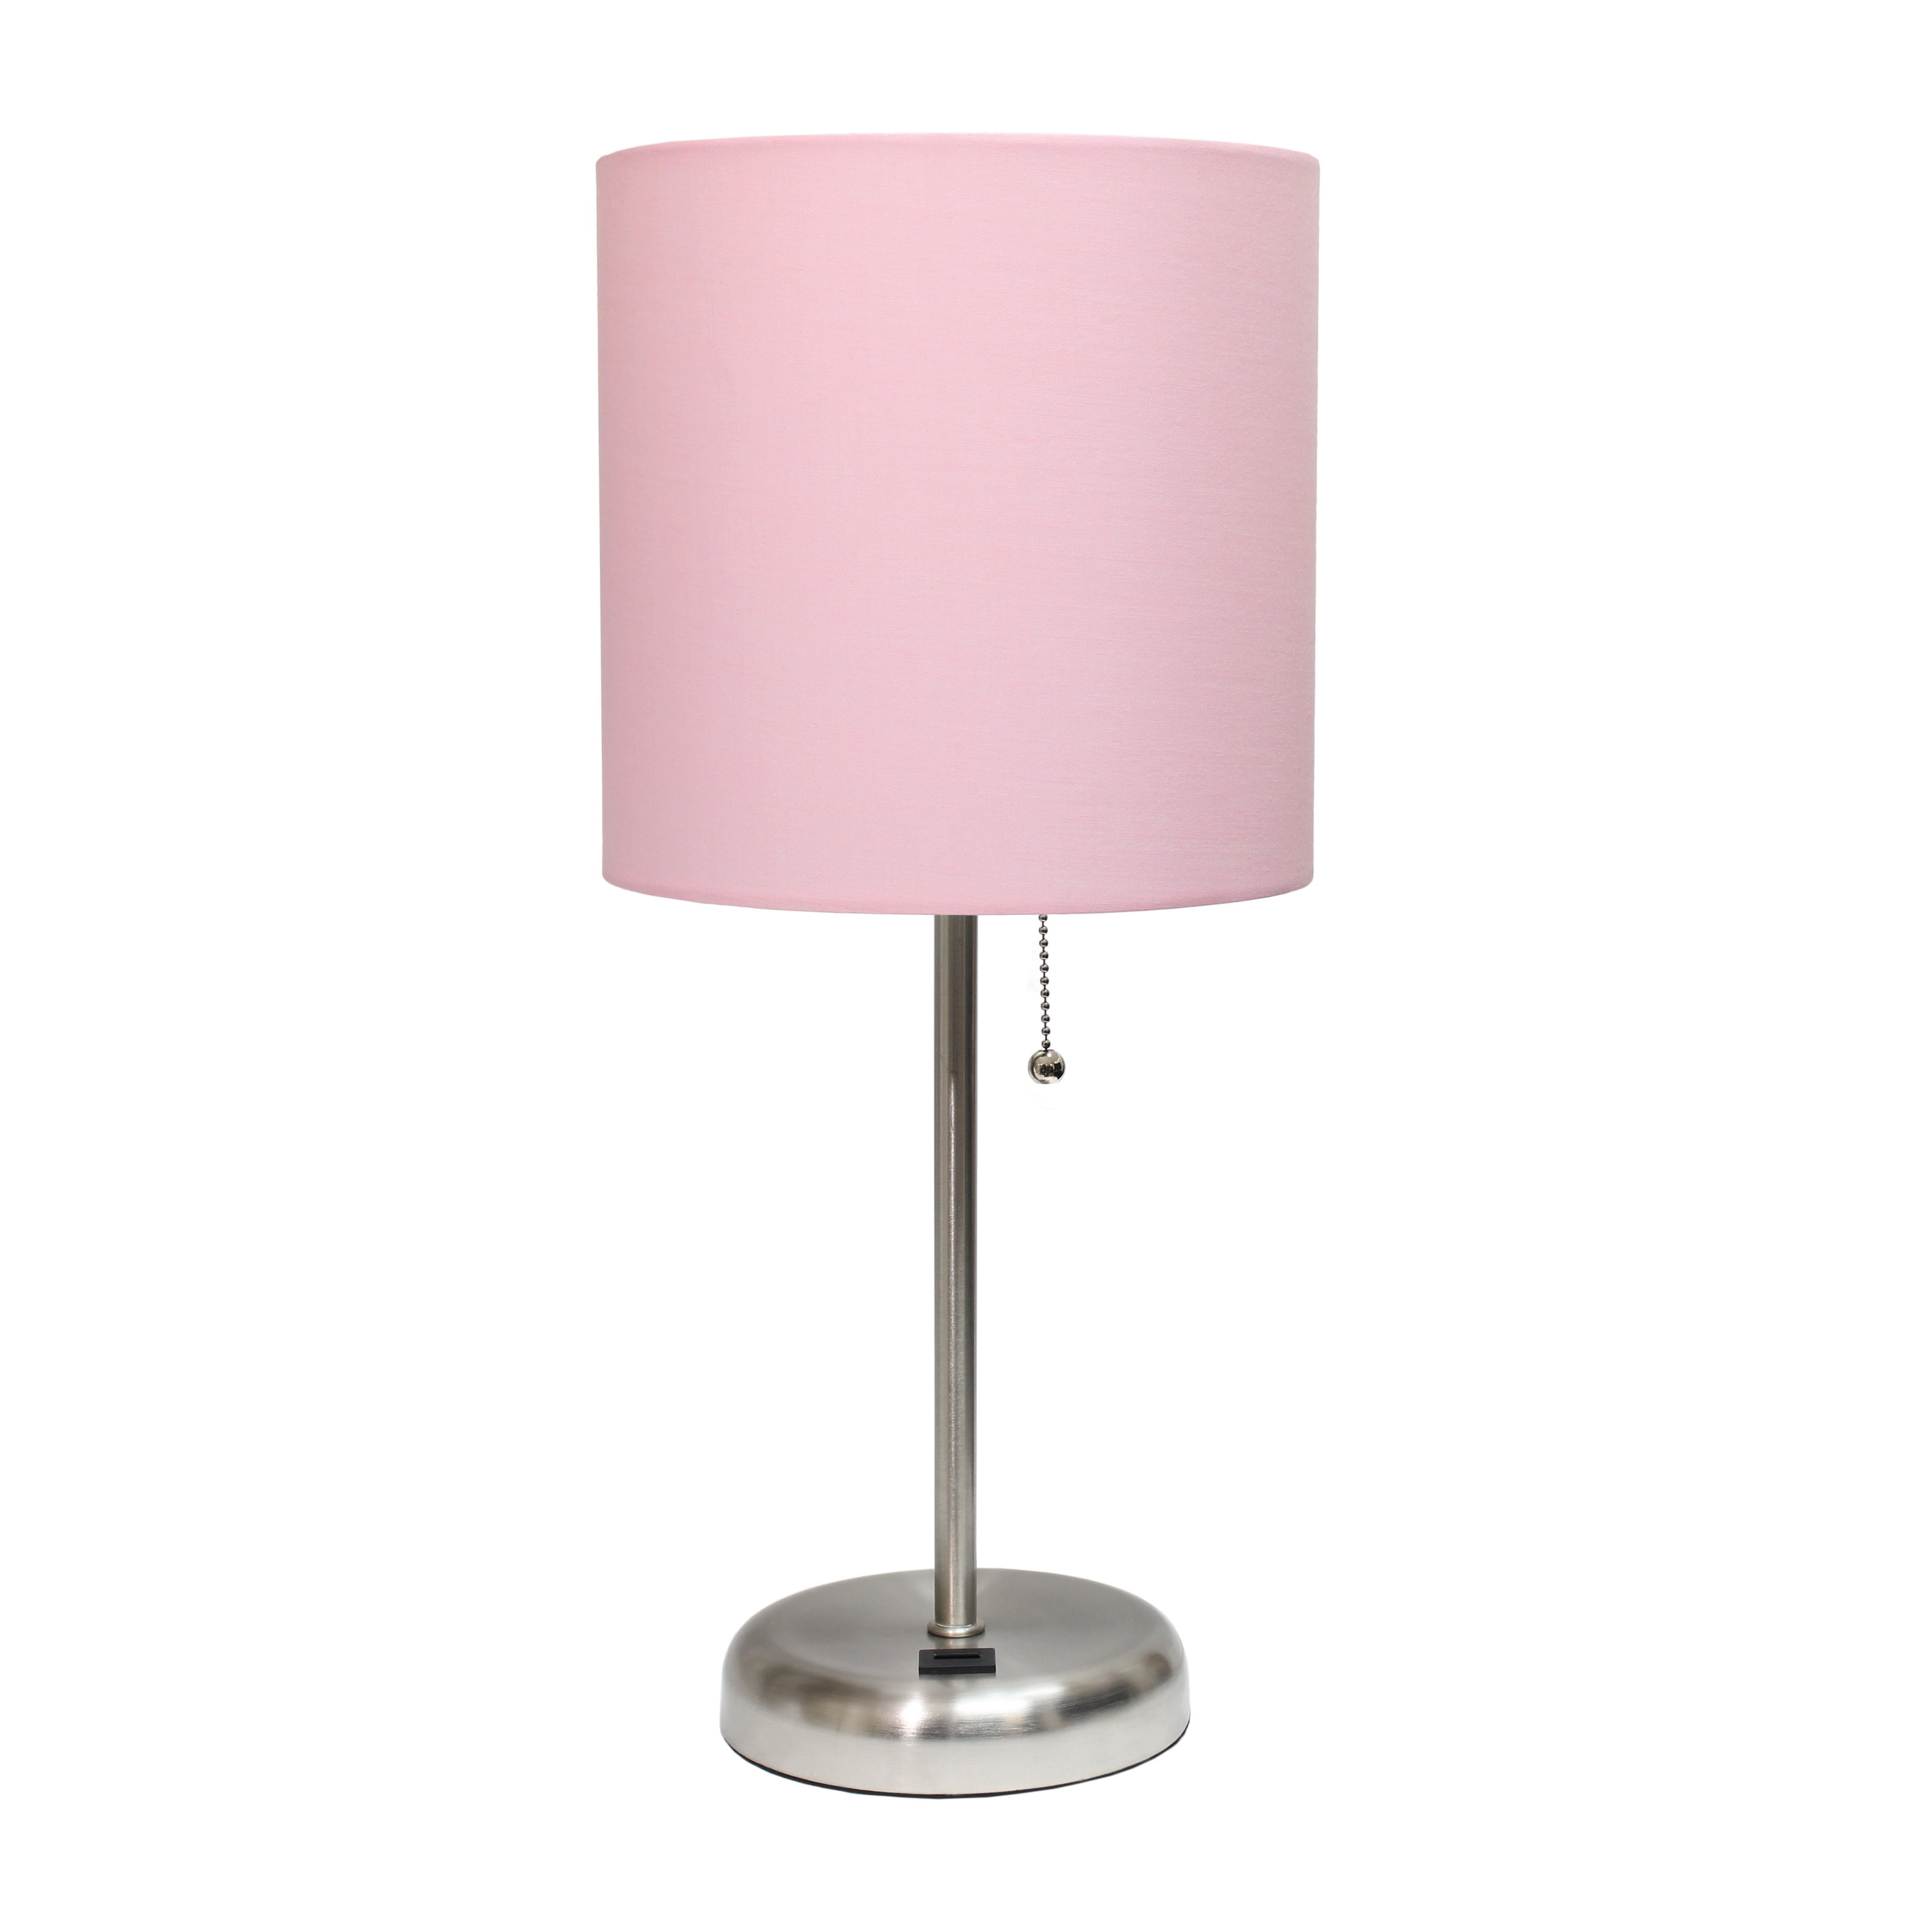 Lt2044-lpk Stick Table Lamp With Usb Charging Port & Fabric Shade, Light Pink